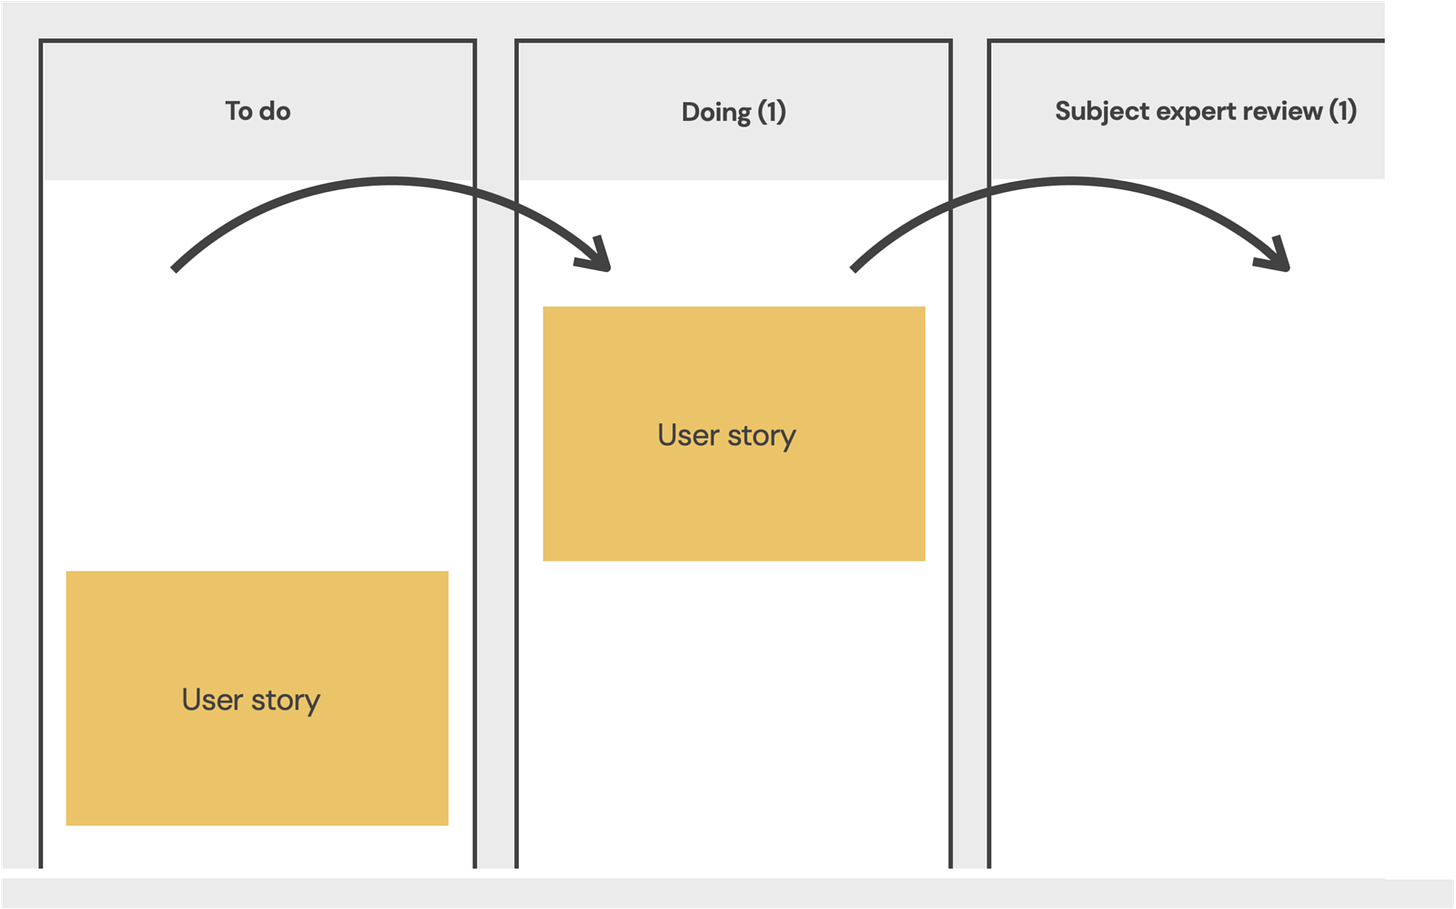 A graphic showing the flow of user stories from left to right on a task board